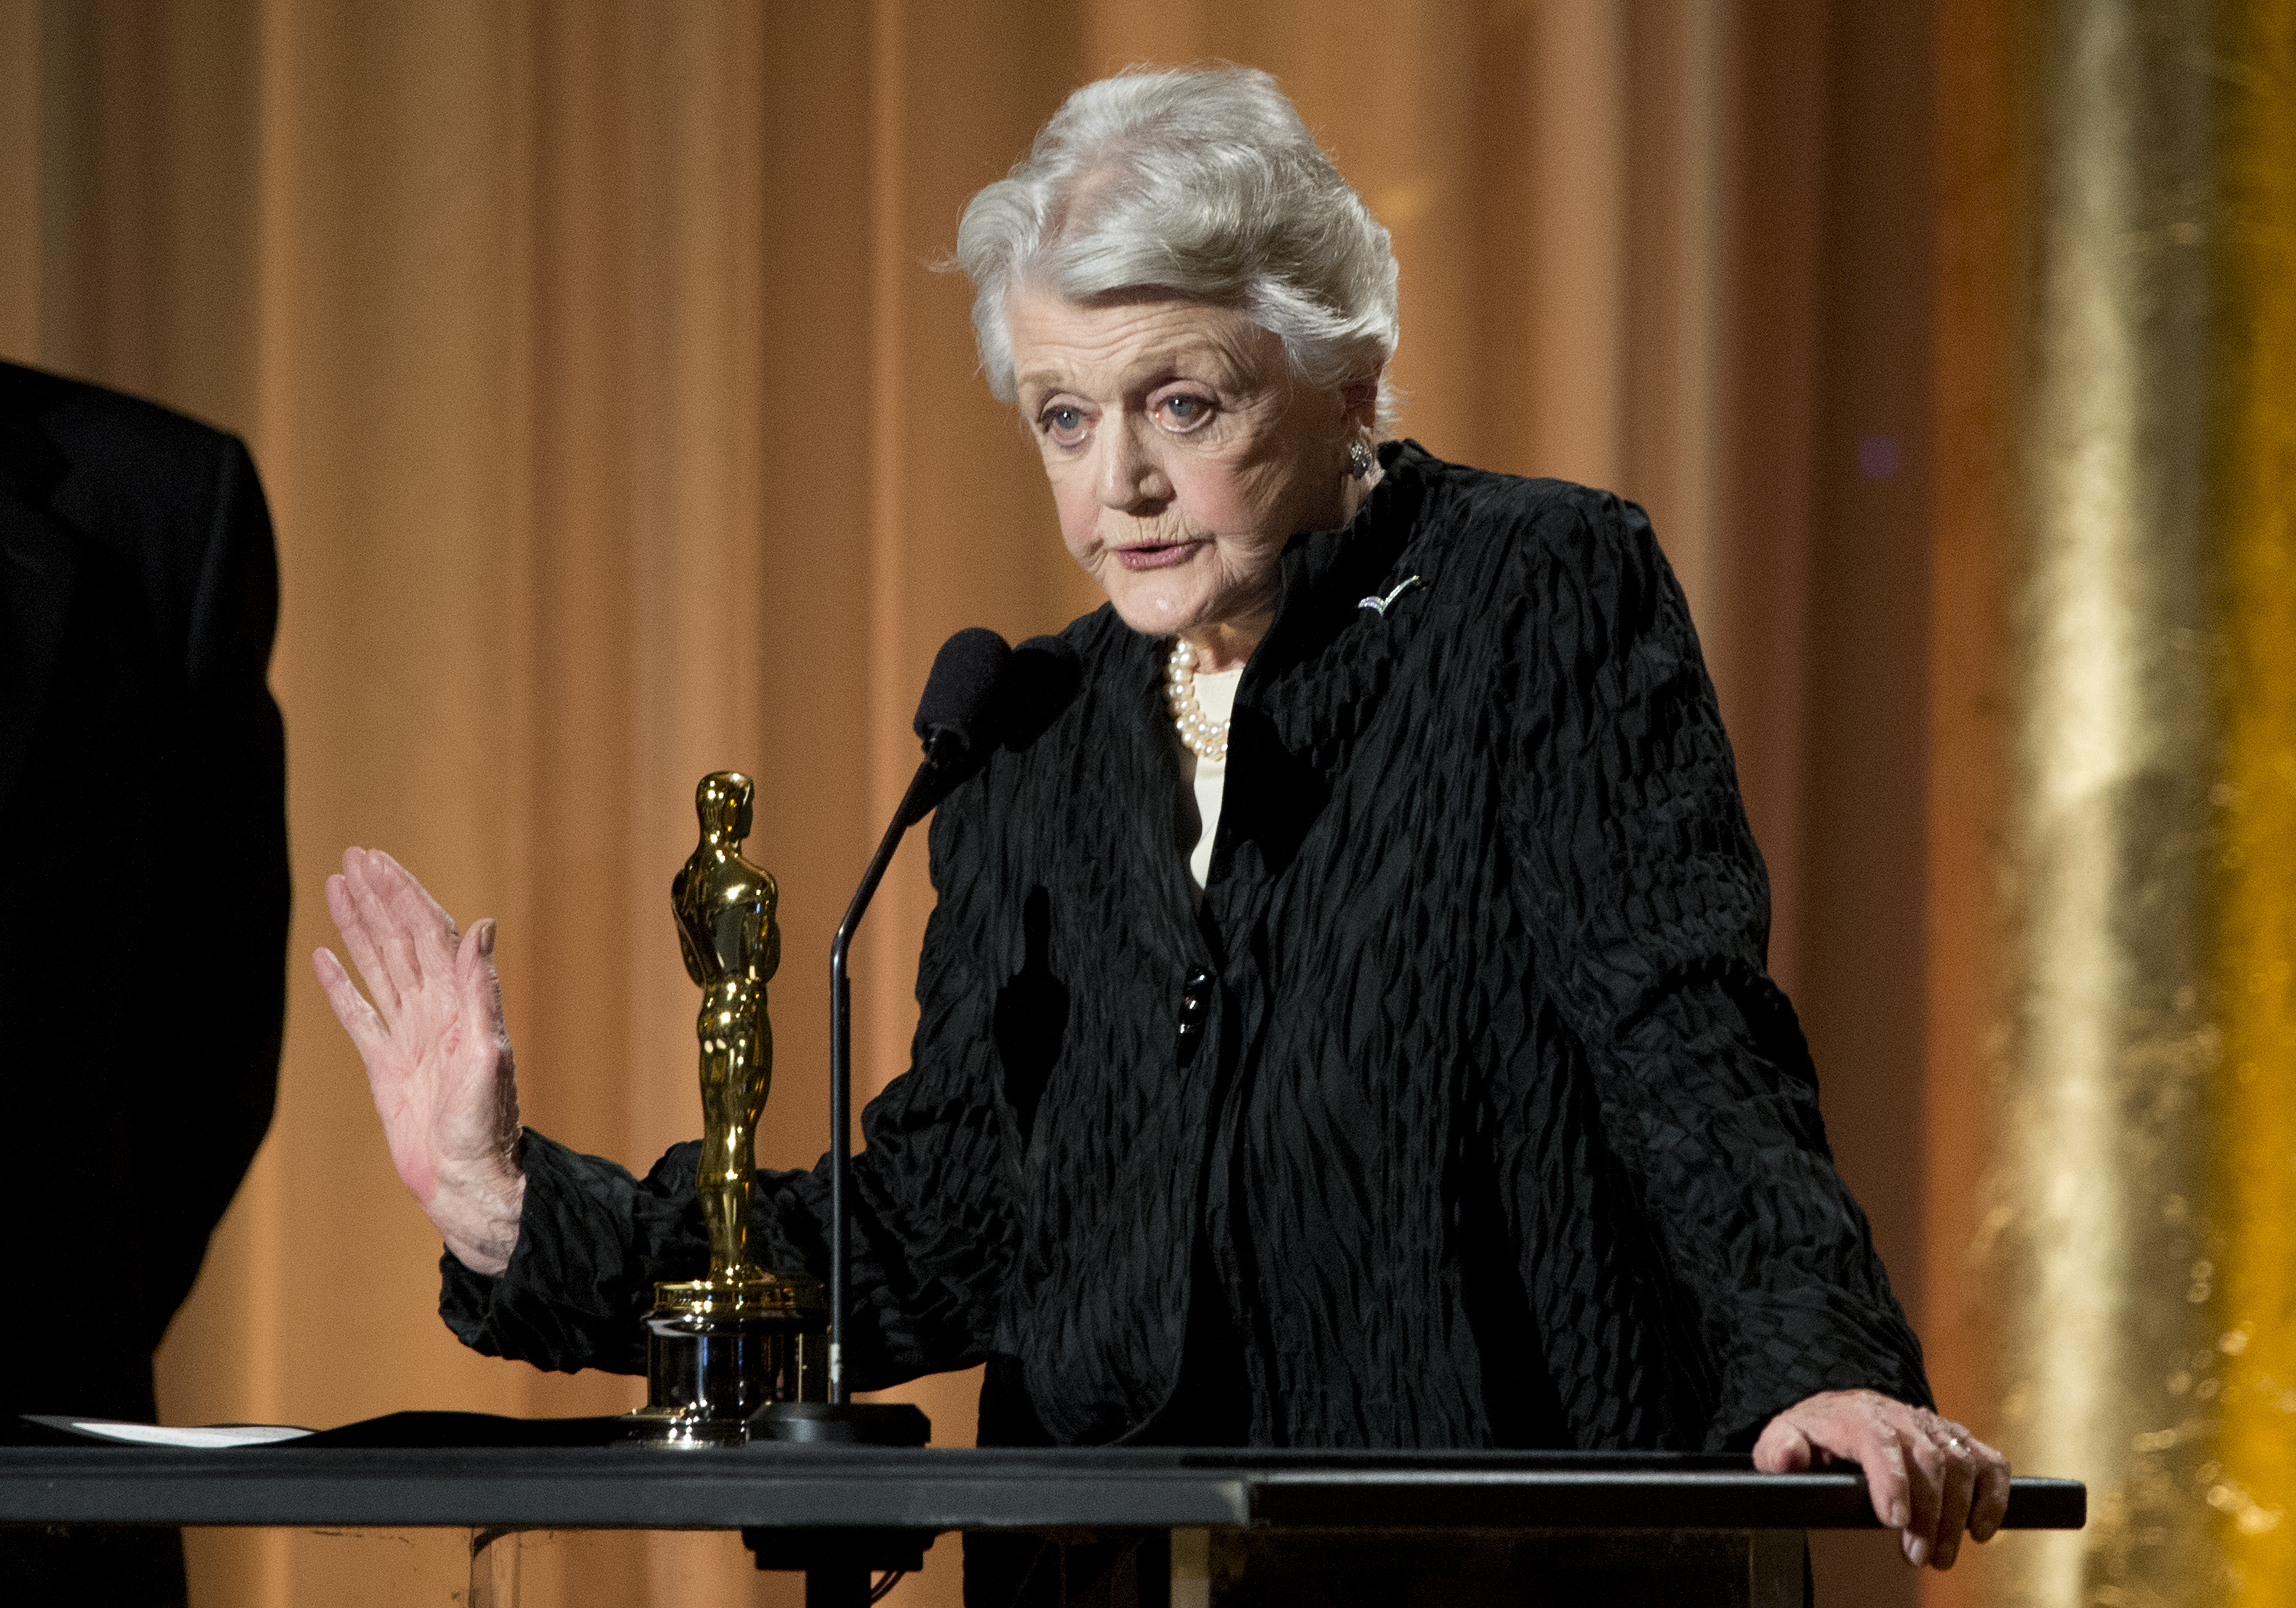 In this file photo Honoree Angela Lansbury accept her award on stage during the 2013 Governors Awards, presented by the American Academy of Motion Picture Arts and Sciences (AMPAS), at the Grand Ballroom of the Hollywood and Highland Center in Hollywood, California.—AFP n